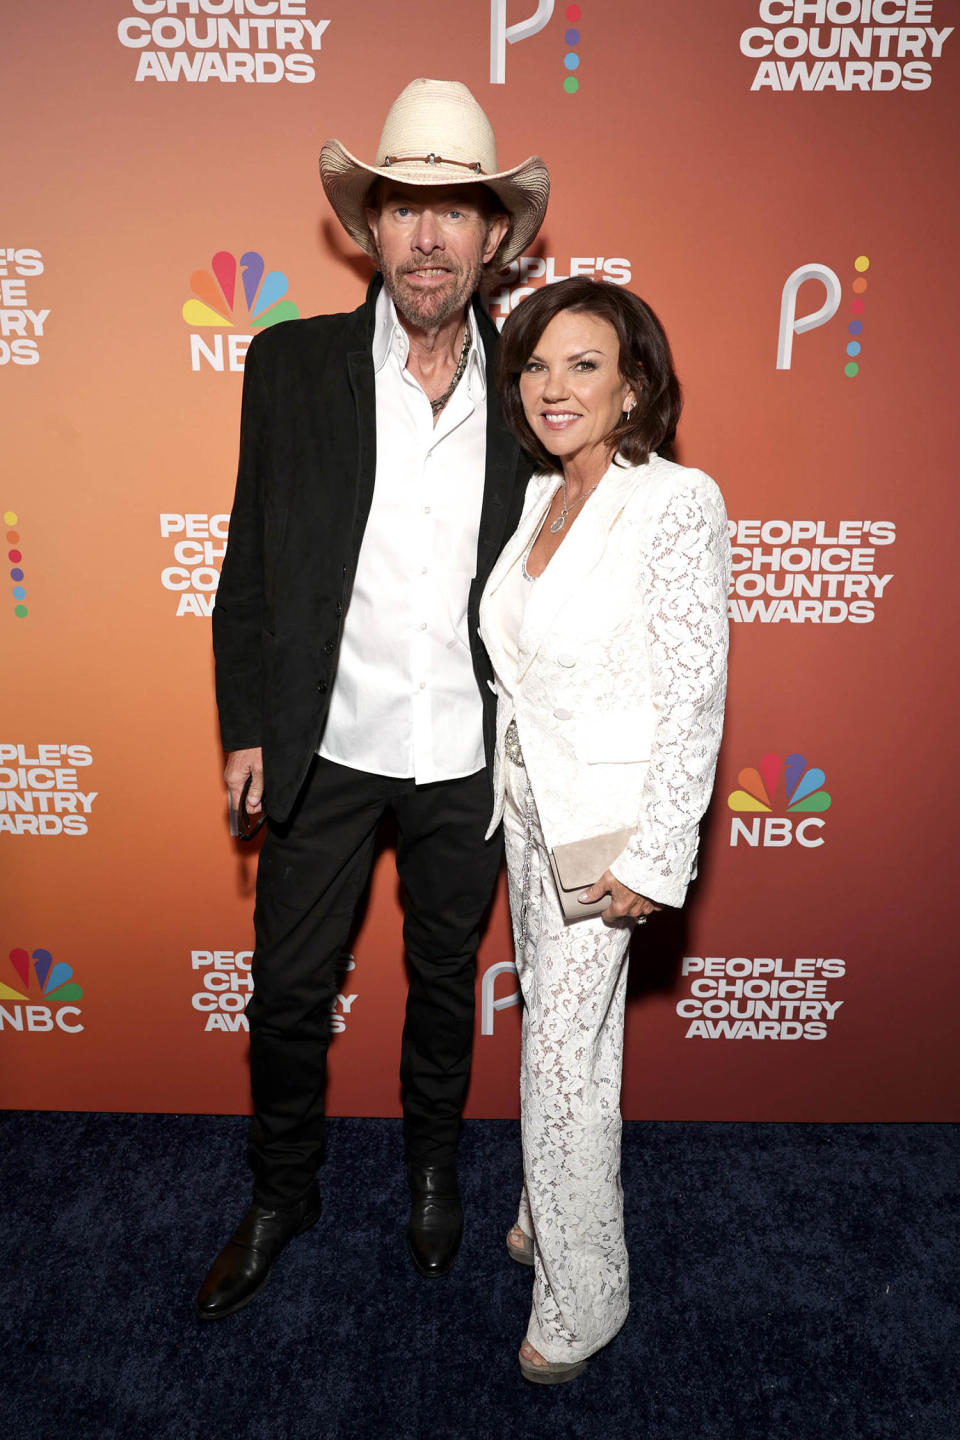 2023 People's Choice Country Awards - Red Carpet (Todd Williamson / NBC via Getty Images)